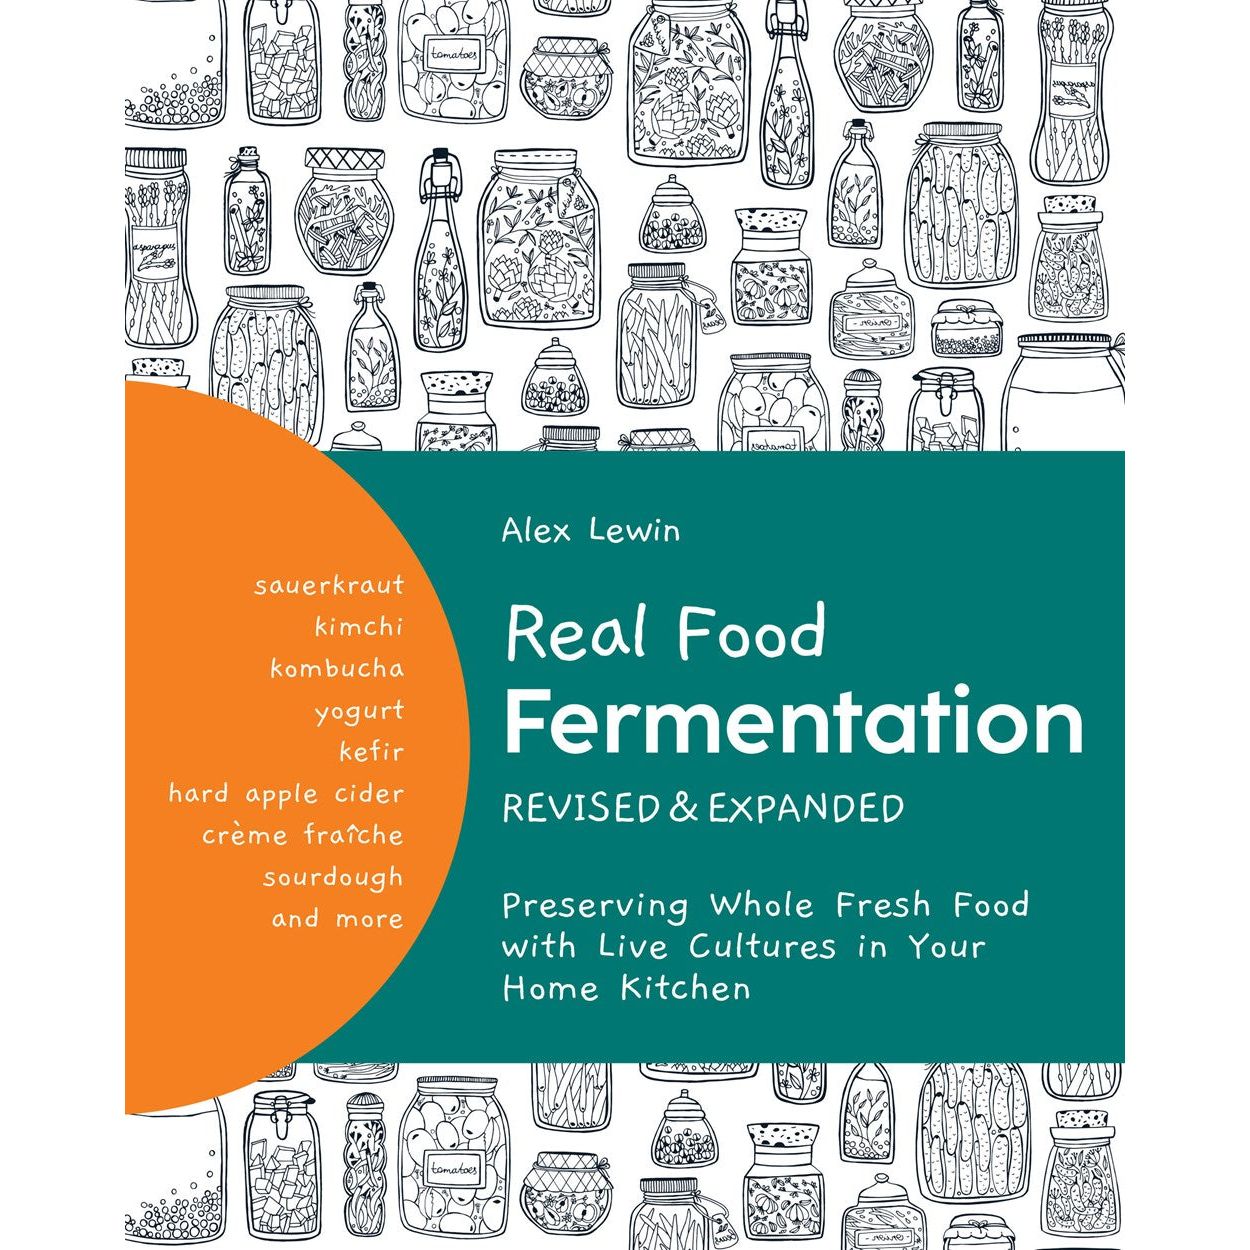 Real Food Fermentation: Revised and Expanded (Alex Lewin)